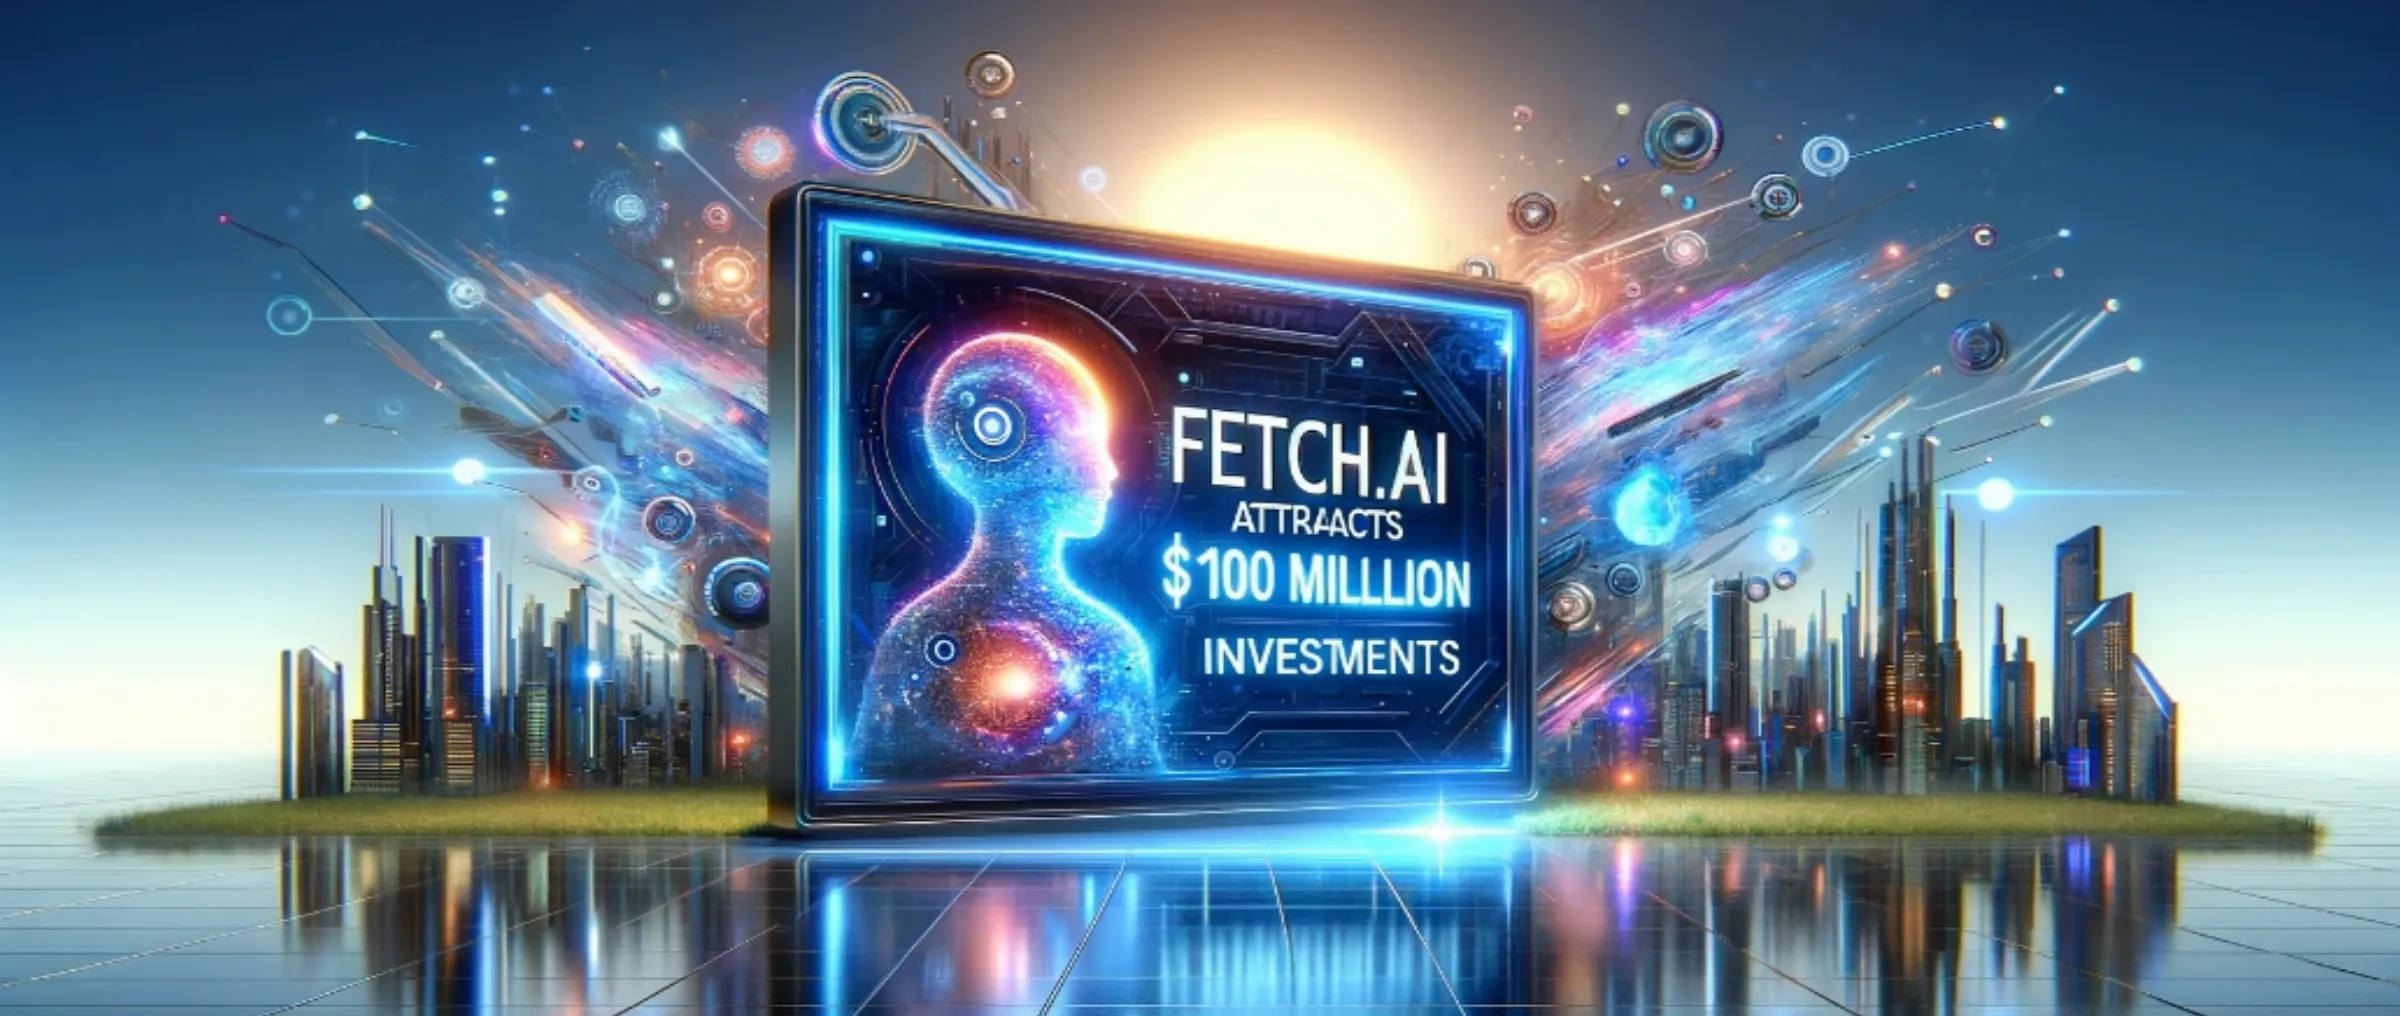 Fetchai (FET) has attracted $100 million in investments